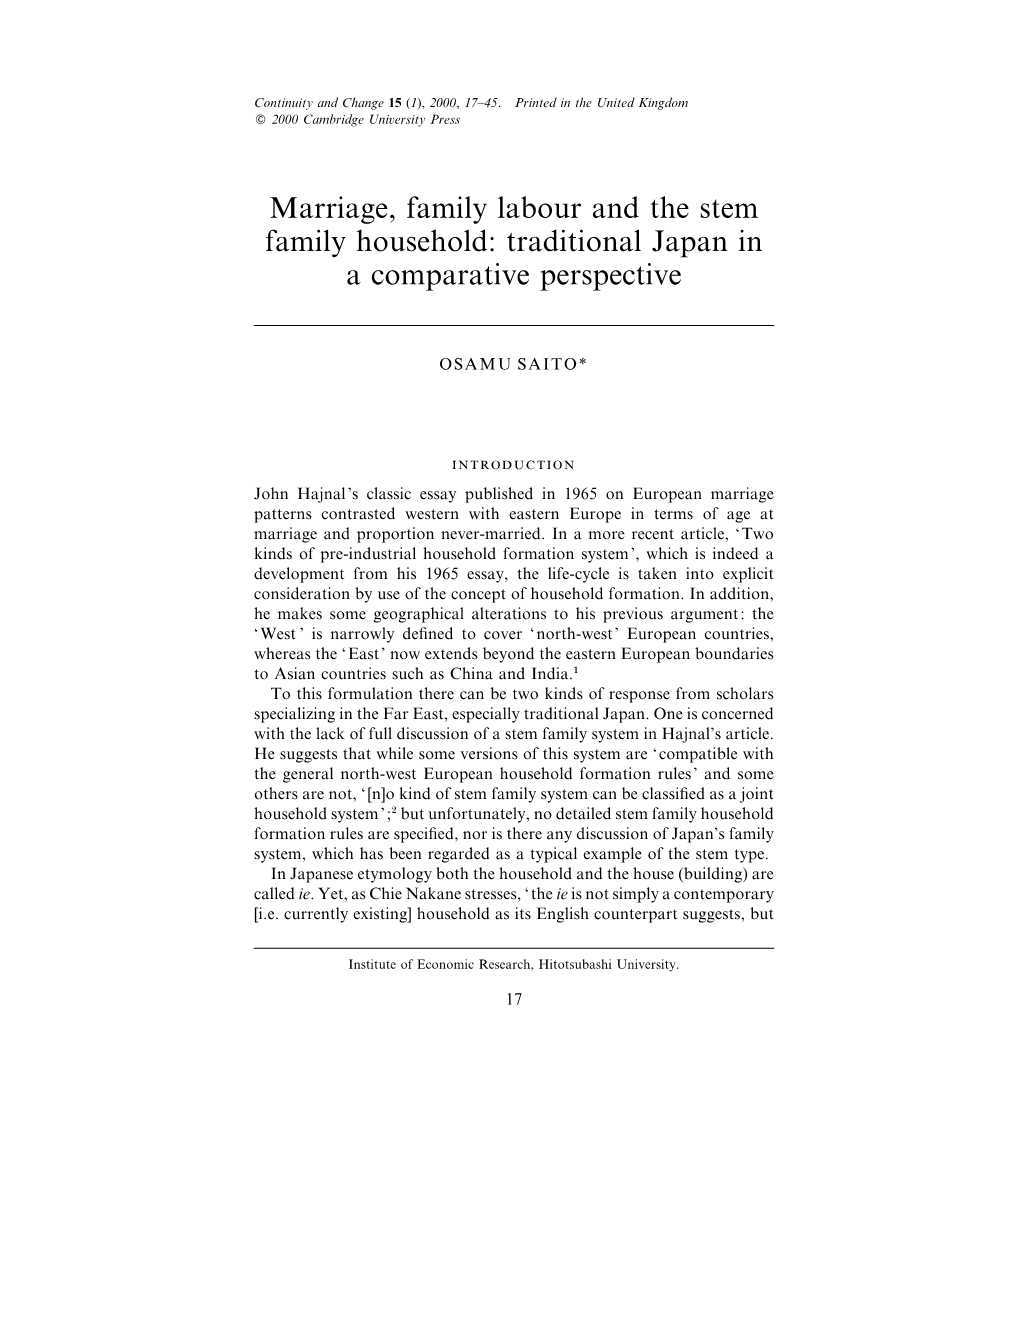 Marriage, Family Labour and the Stem Family Household: Traditional Japan in a Comparative Perspective